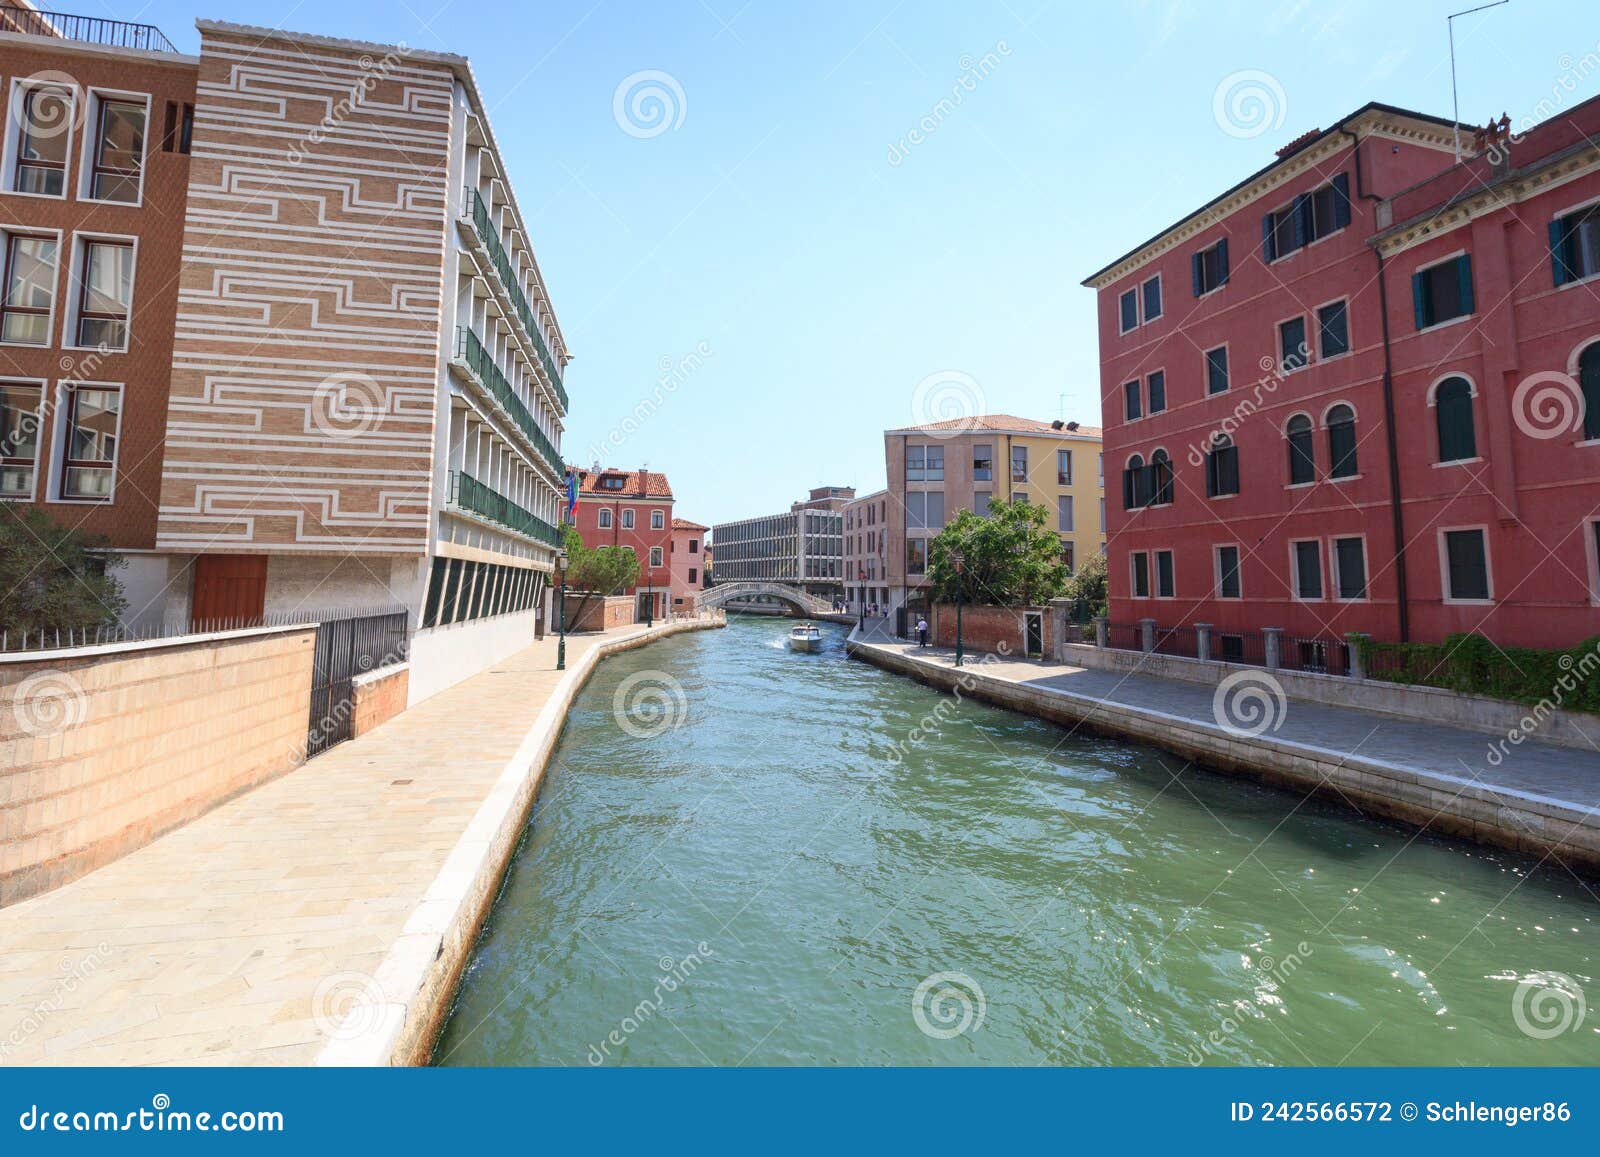 channel with boat and modern buildings in district sestiere santa croce in venice, italy